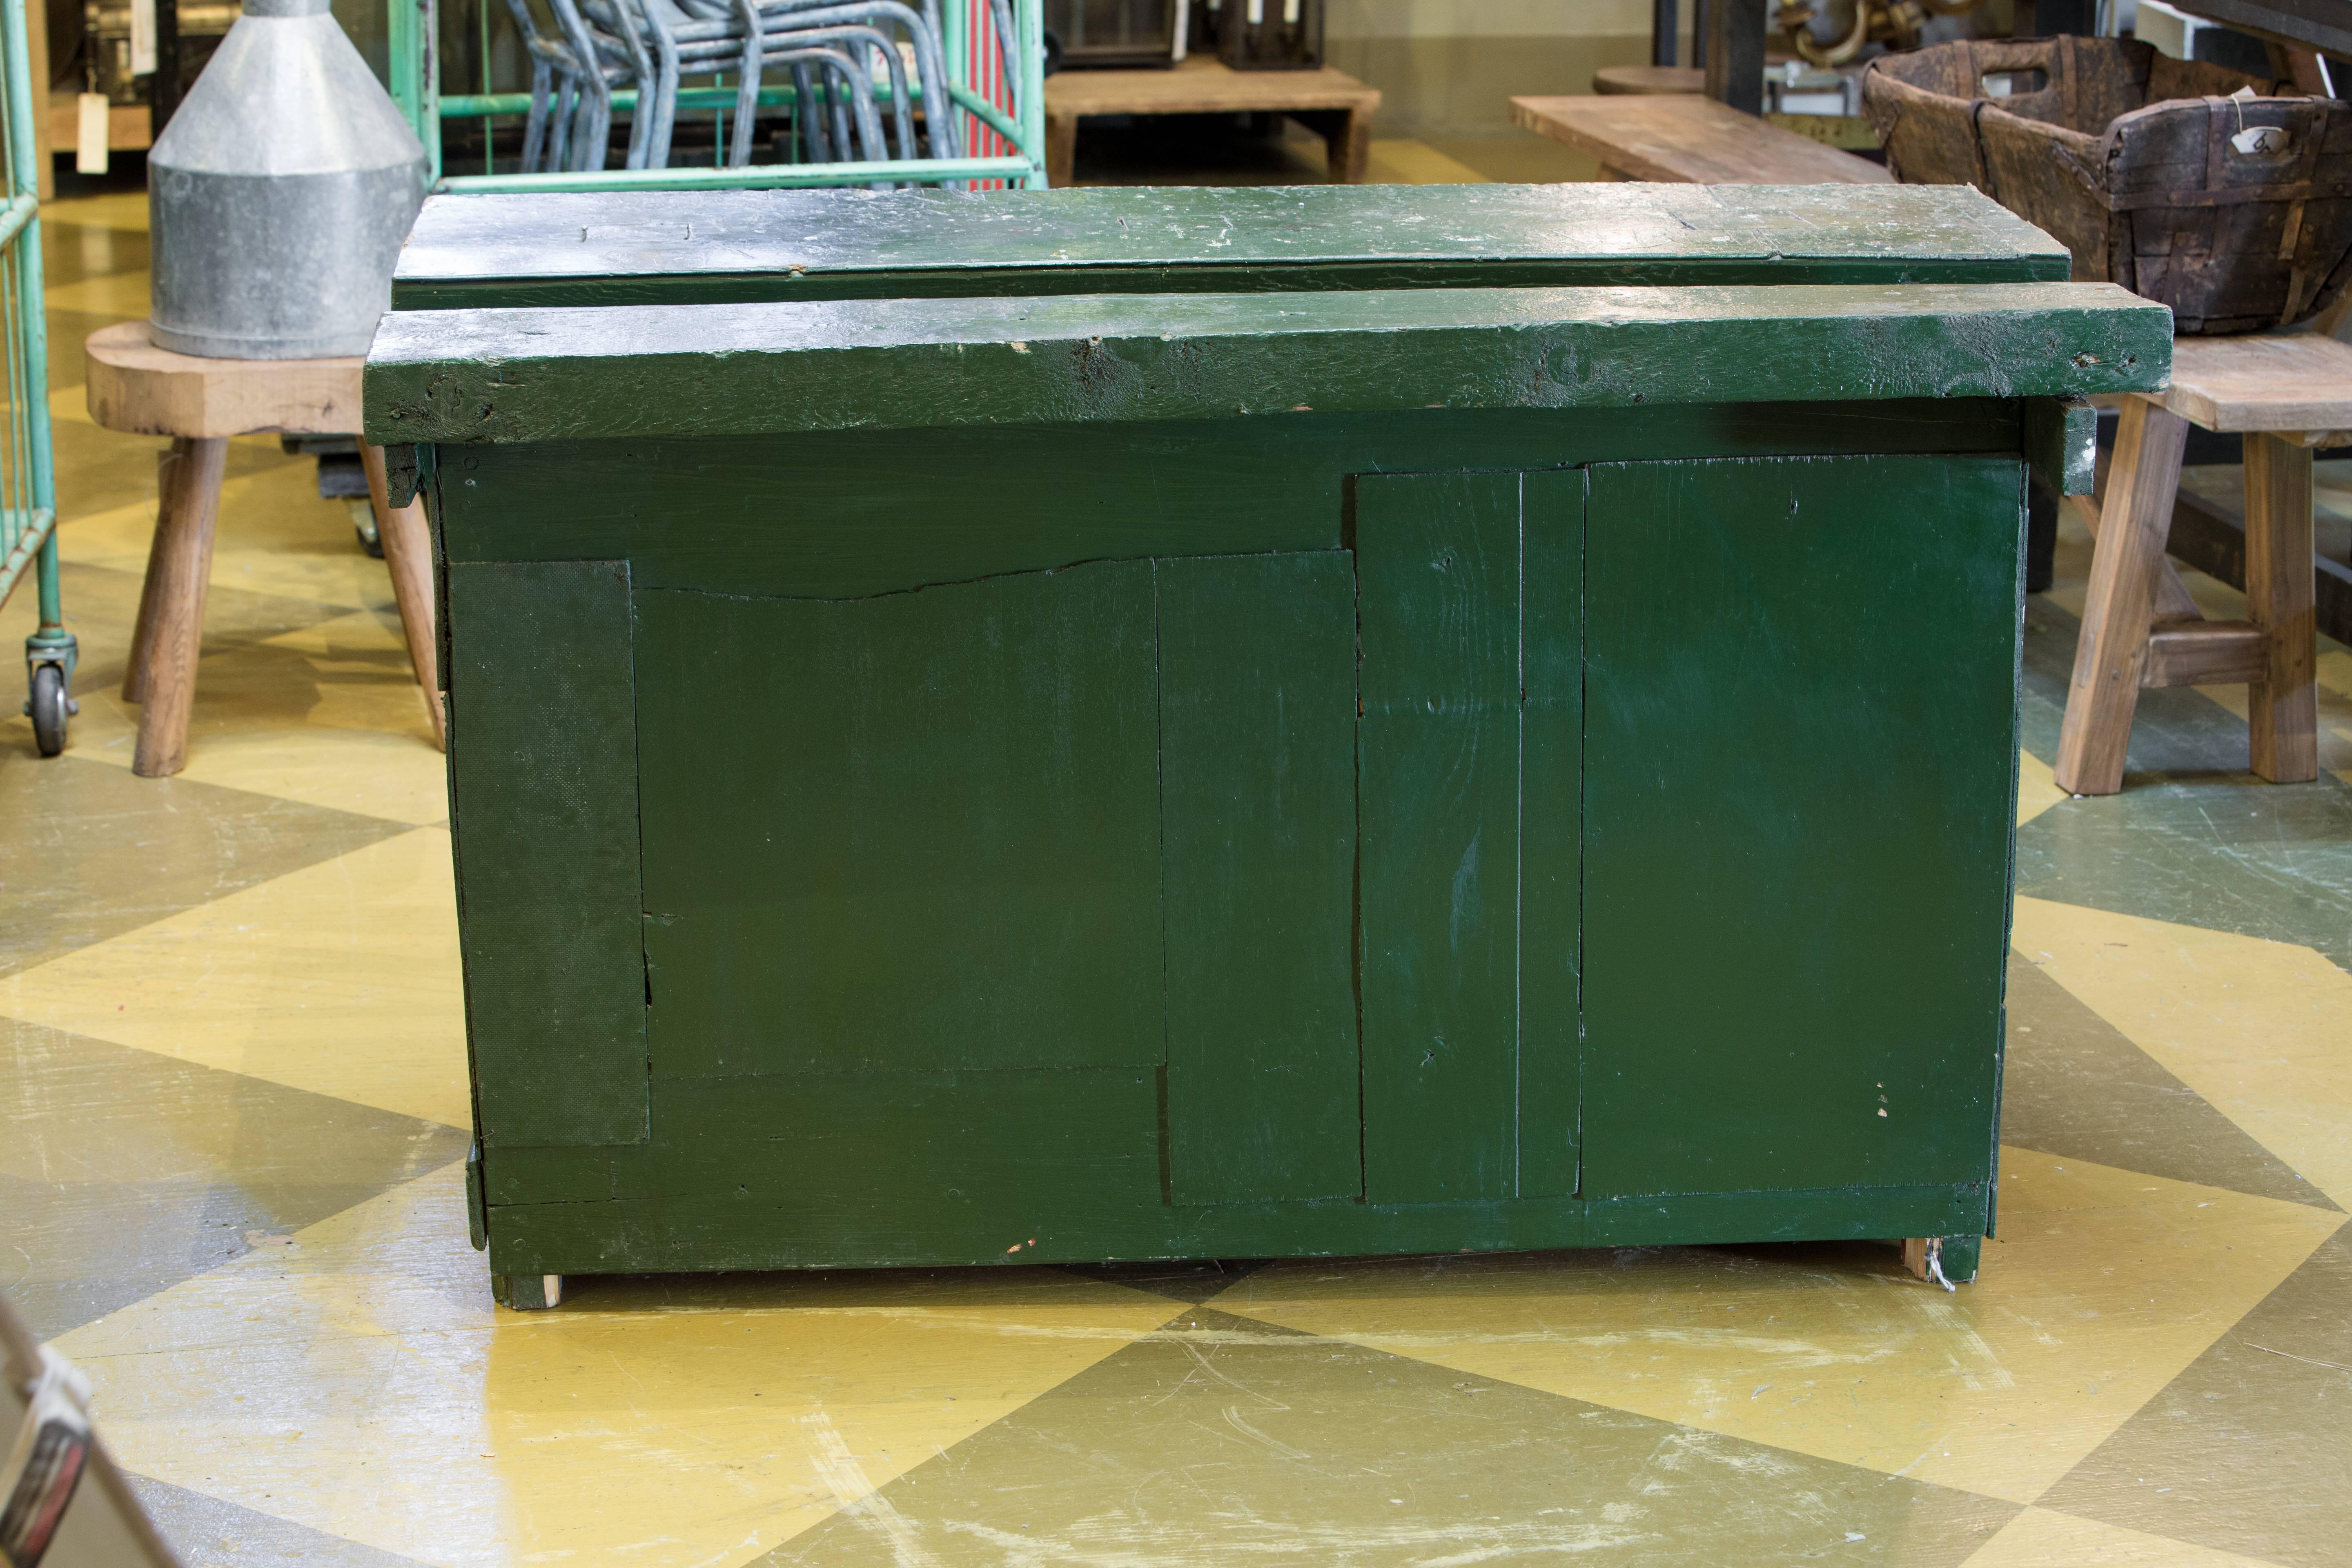 Hand-Crafted Vintage Green Belgian Industrial Work Bench with Drawers, circa 1920